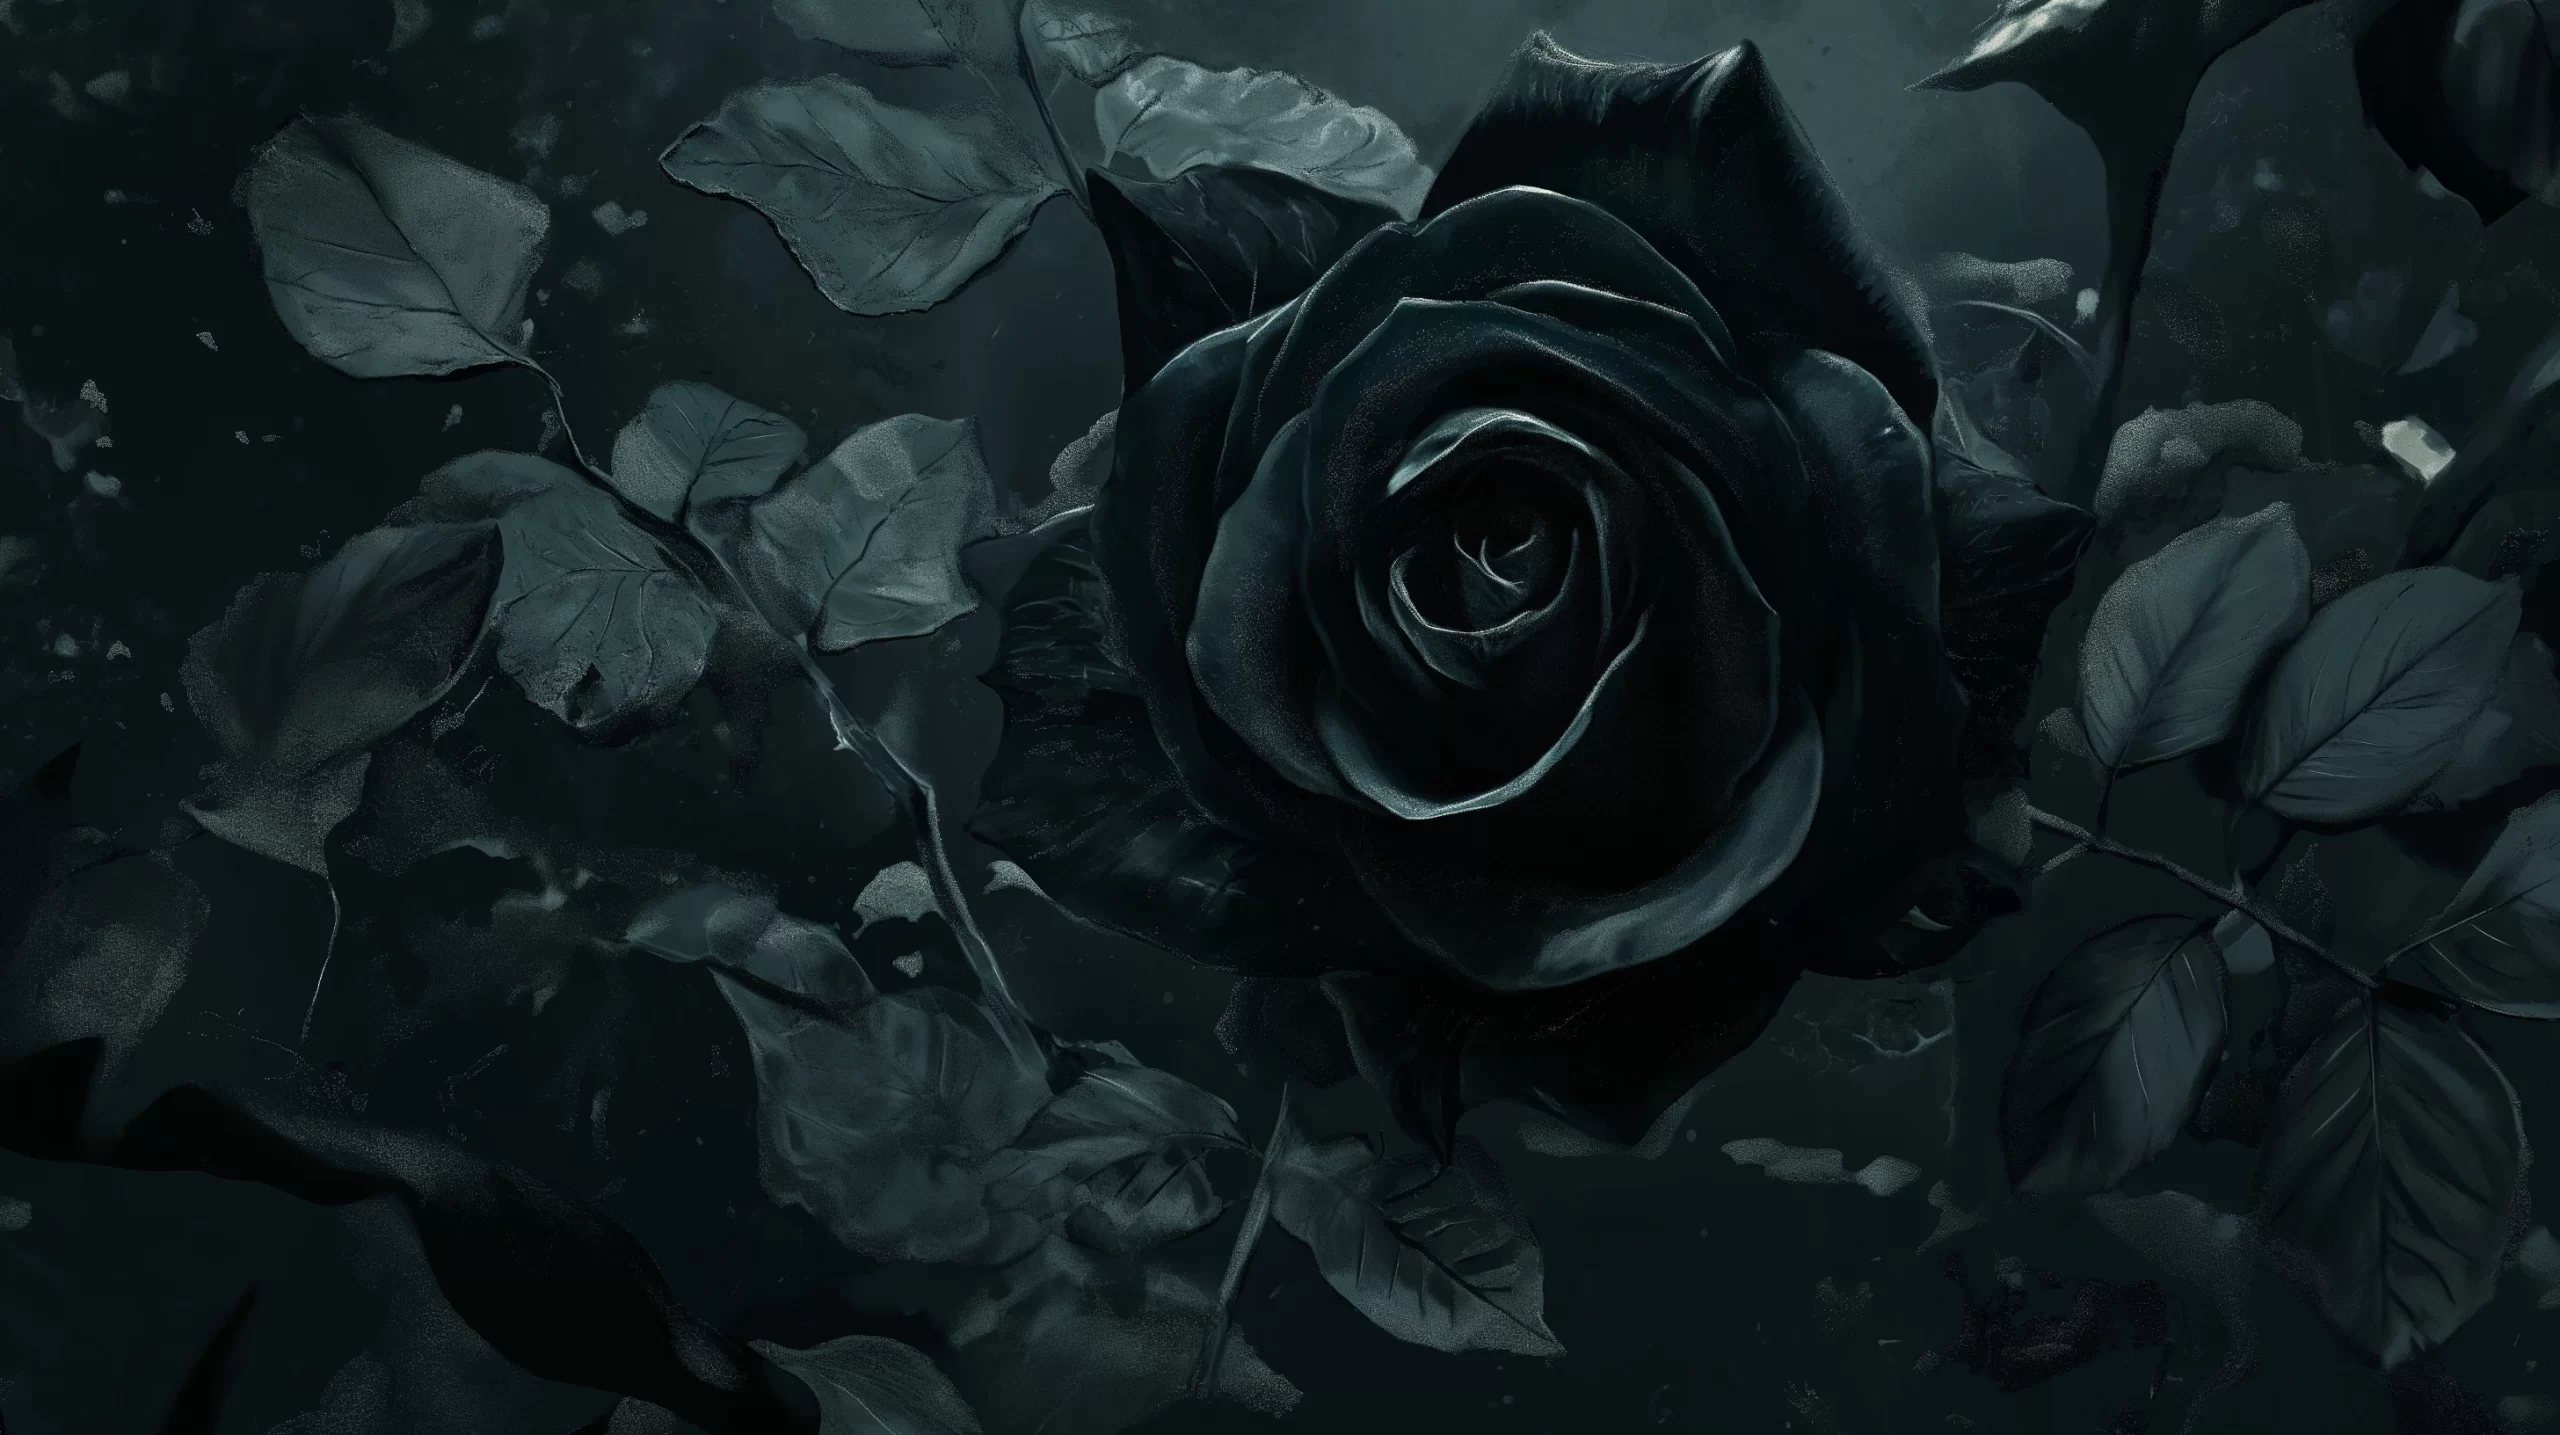 The Black Rose in Horticulture